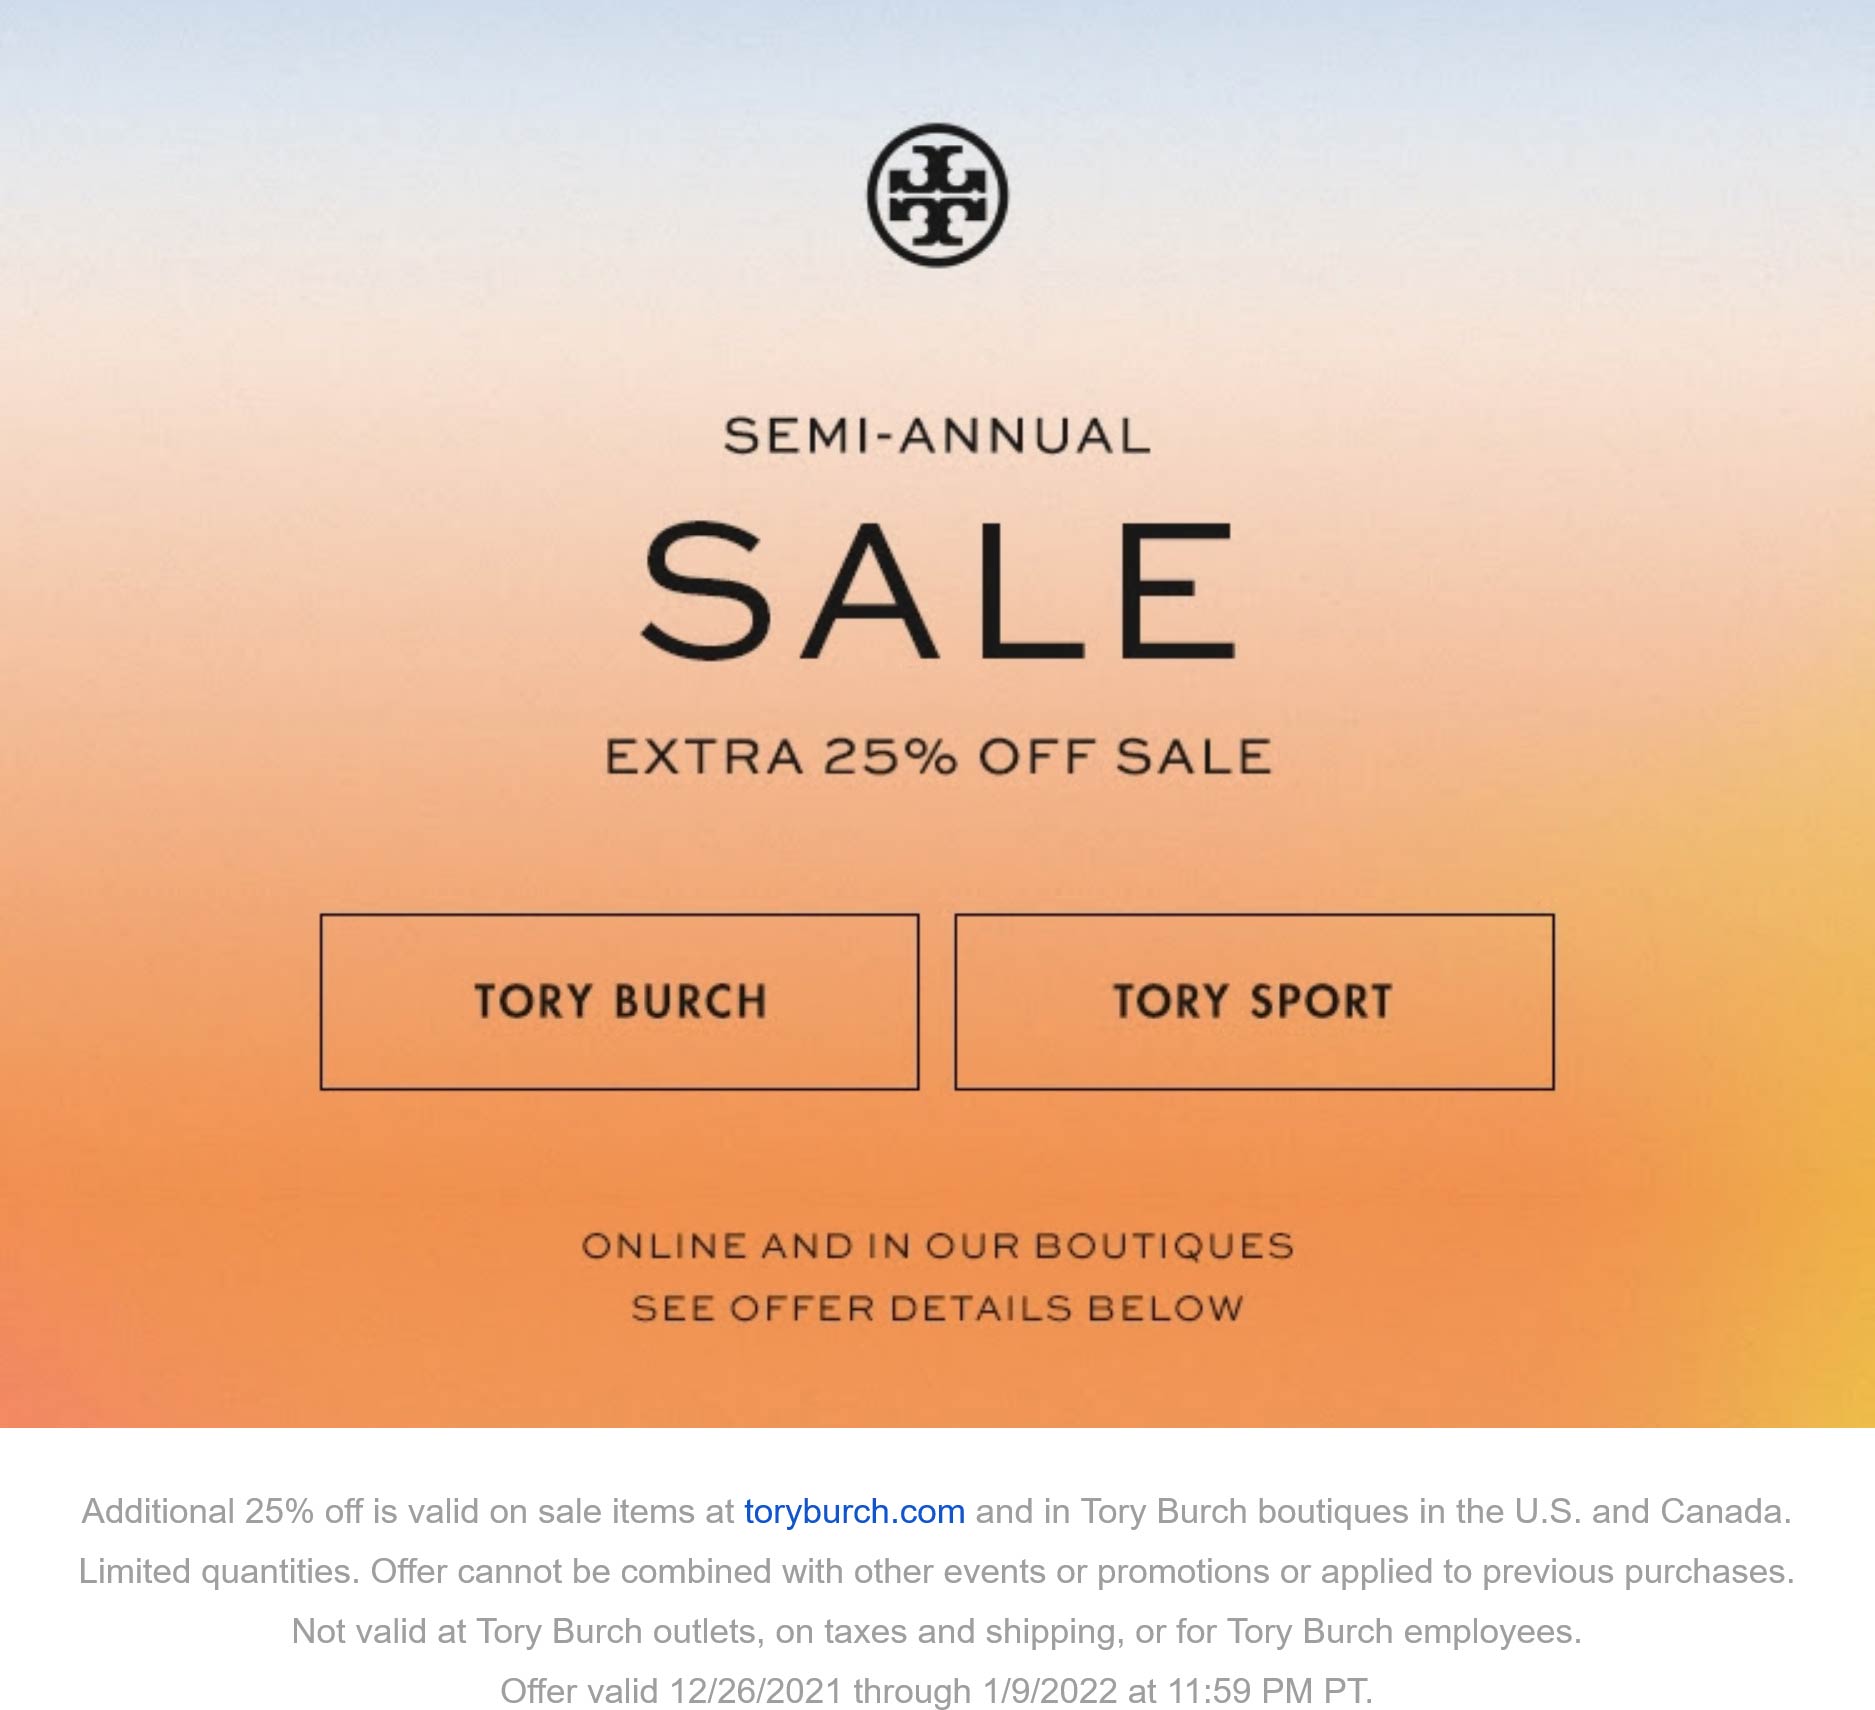 Tory Burch stores Coupon  Extra 25% off at Tory Burch, ditto online #toryburch 